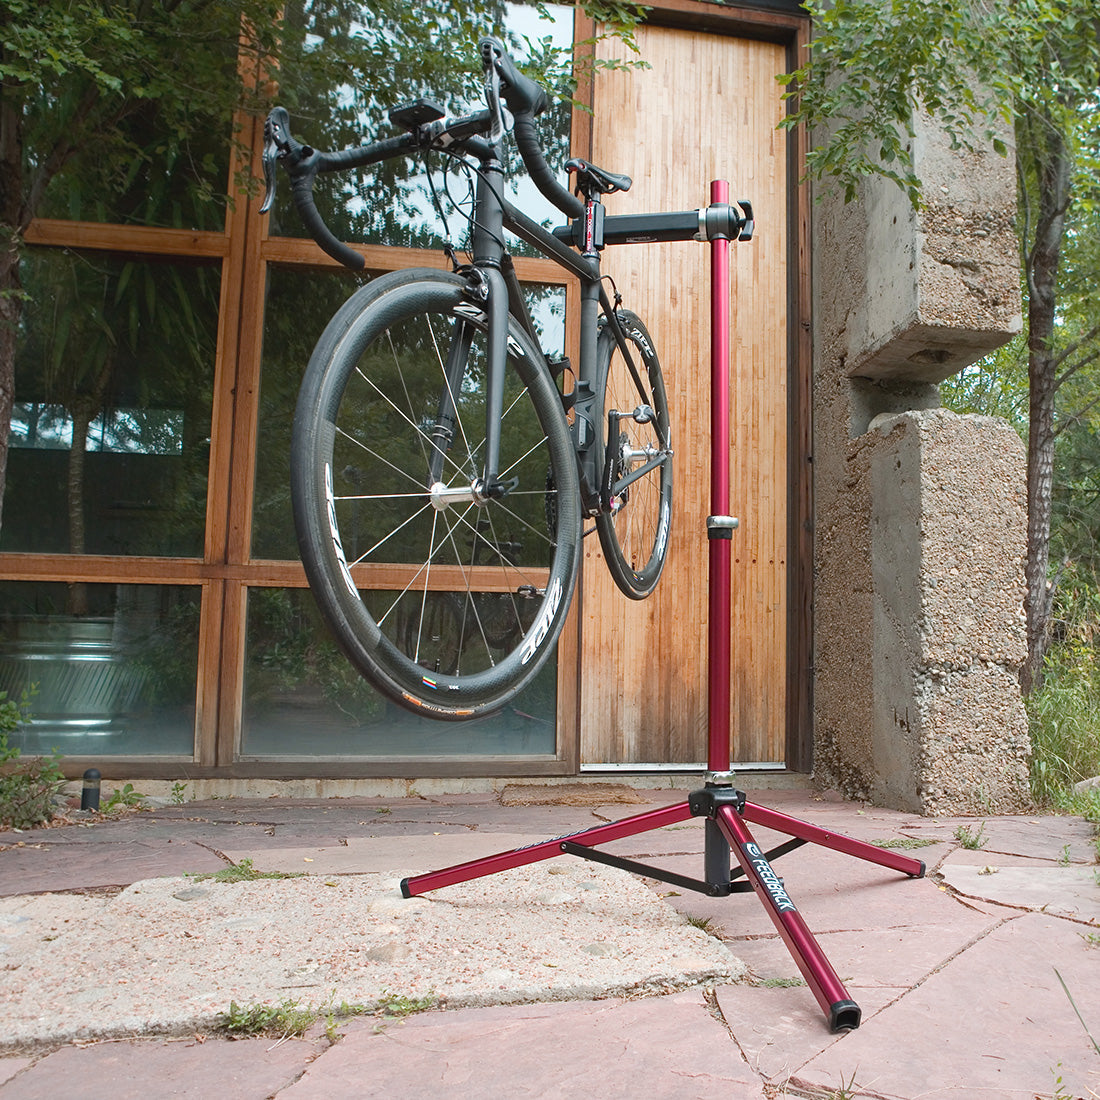 Feedback sports Ultralight bike repair stand deployed and holding a bike in front of a building.